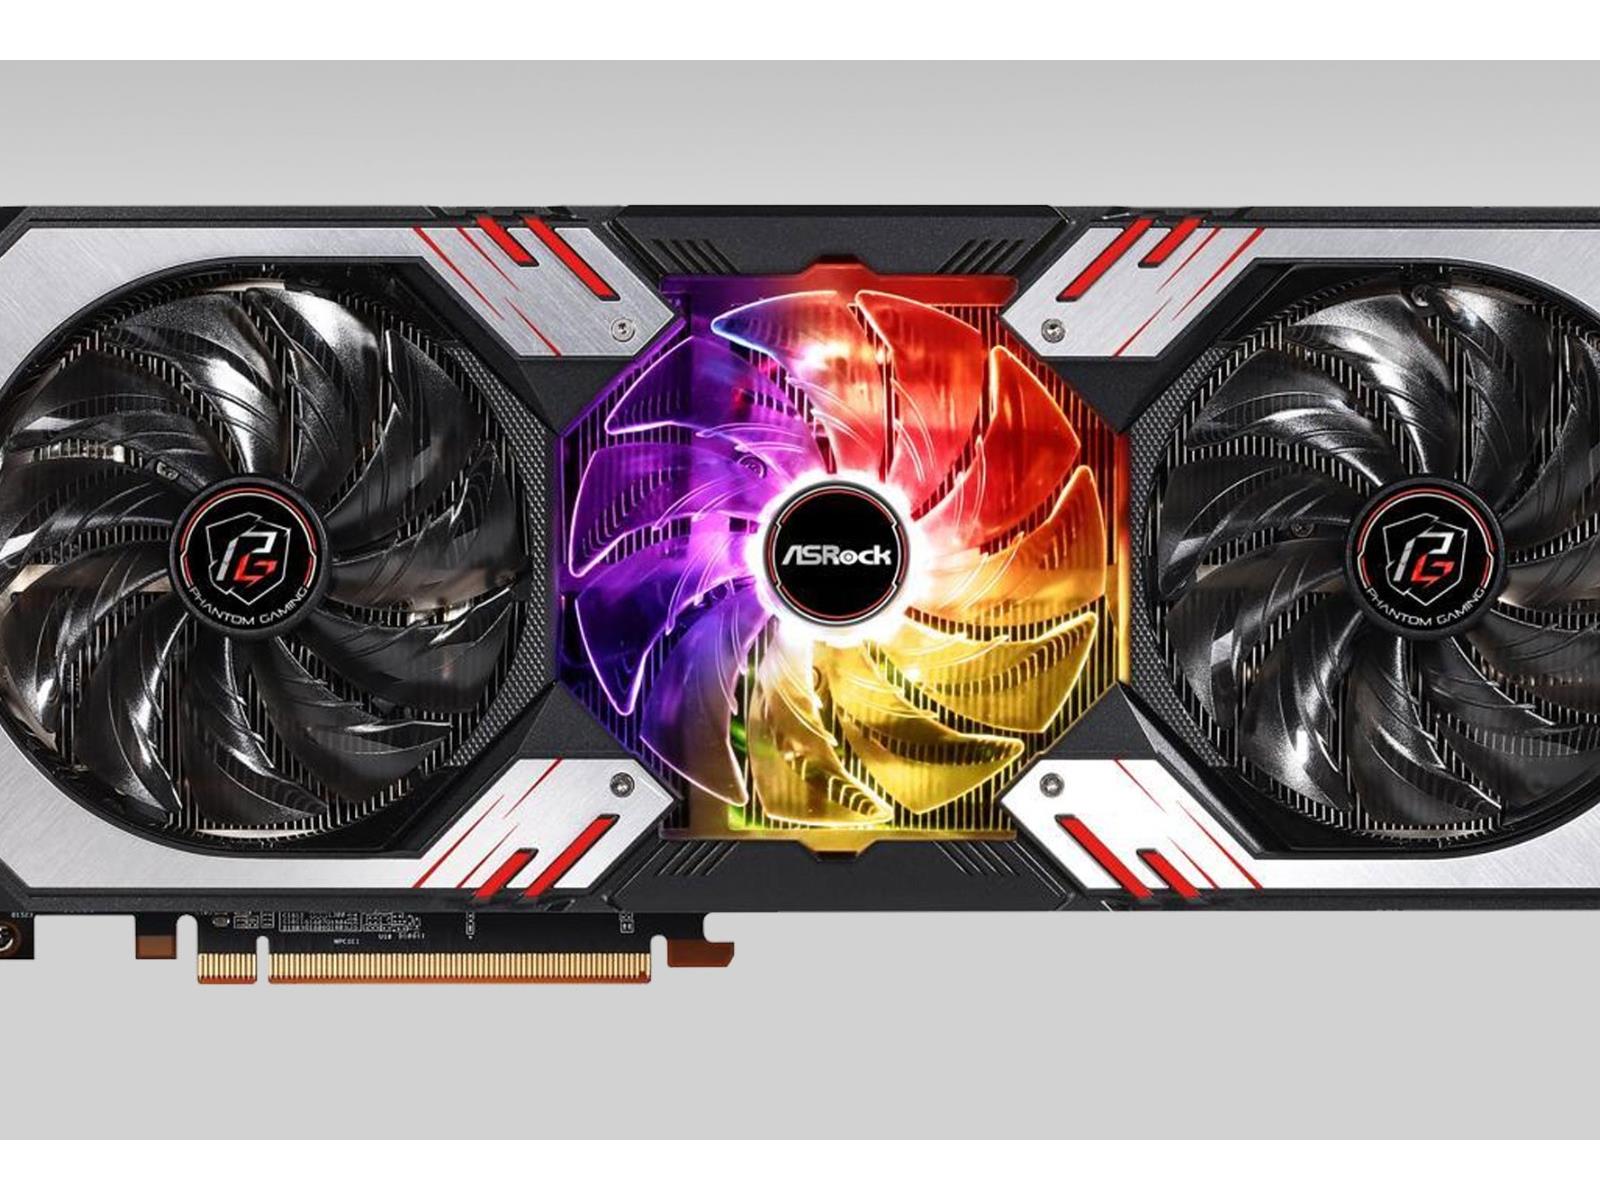 AMD Radeon RX 6950 XT 16GB Prices Slashed To $599 To Take On RTX